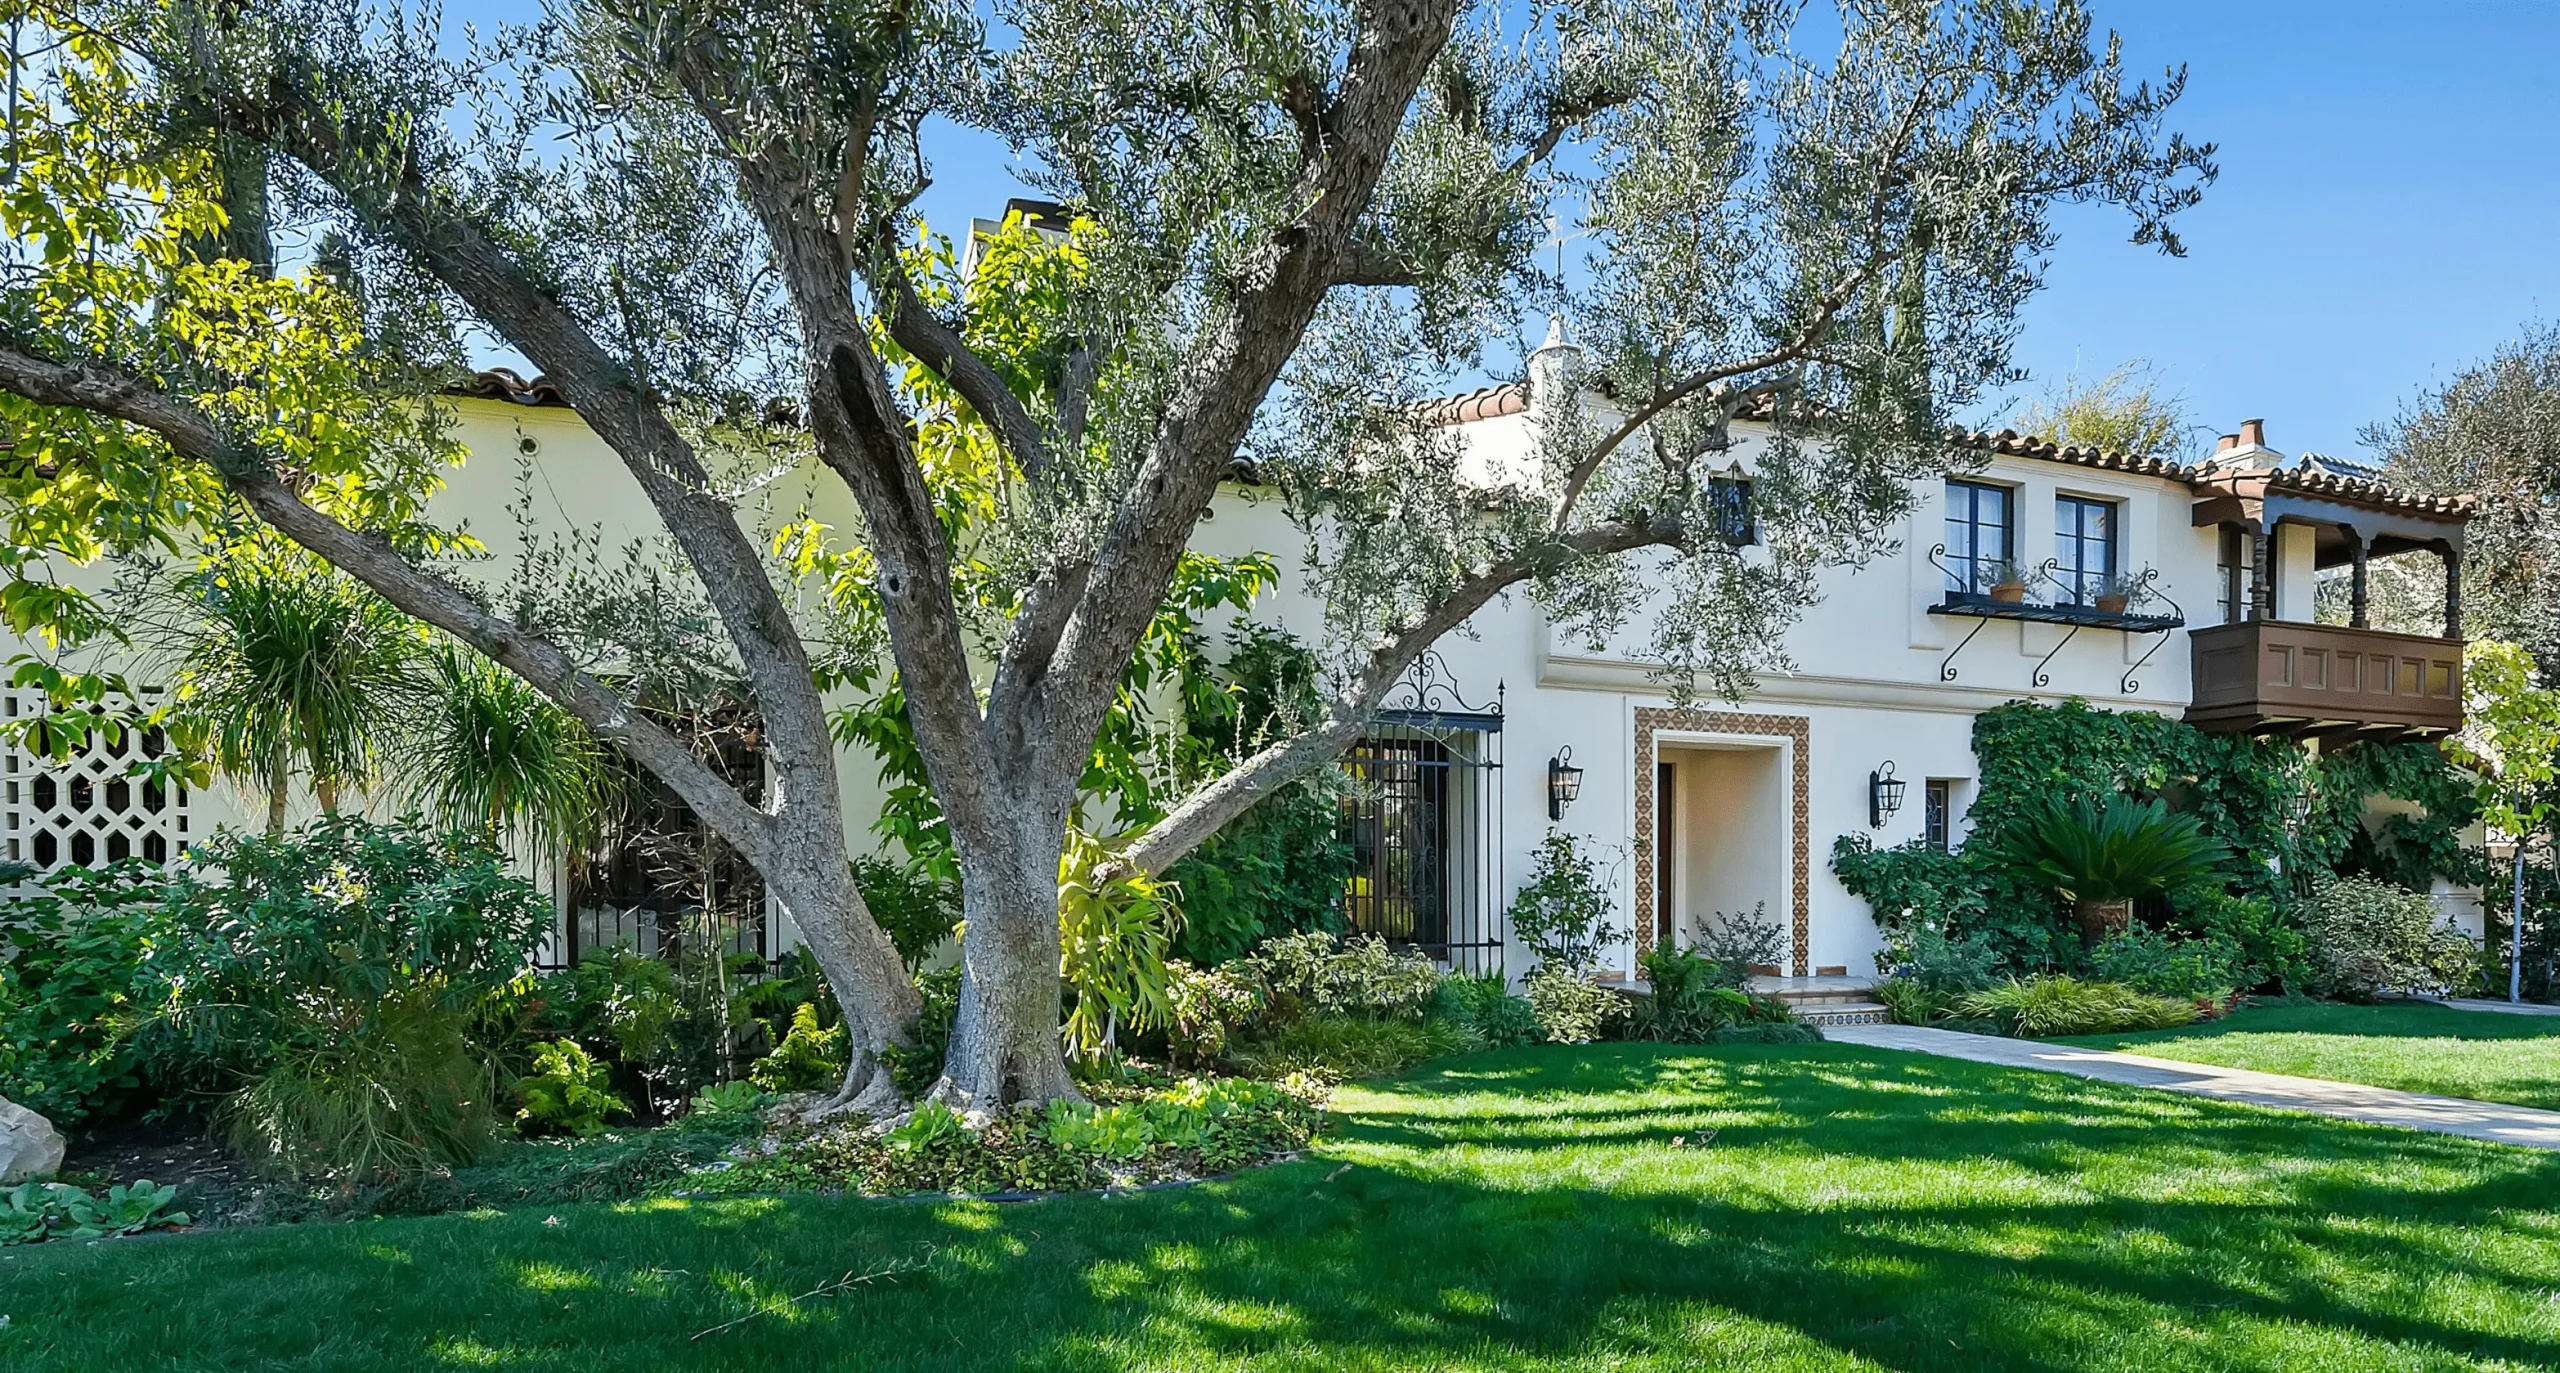 Traditional two-story home with white stucco walls and terracotta roof tiles, featuring ornate black wrought iron balcony railings and a gated entry. Lush landscaping, including mature trees, manicured lawn, and vibrant green shrubs, enhance the property's curb appeal